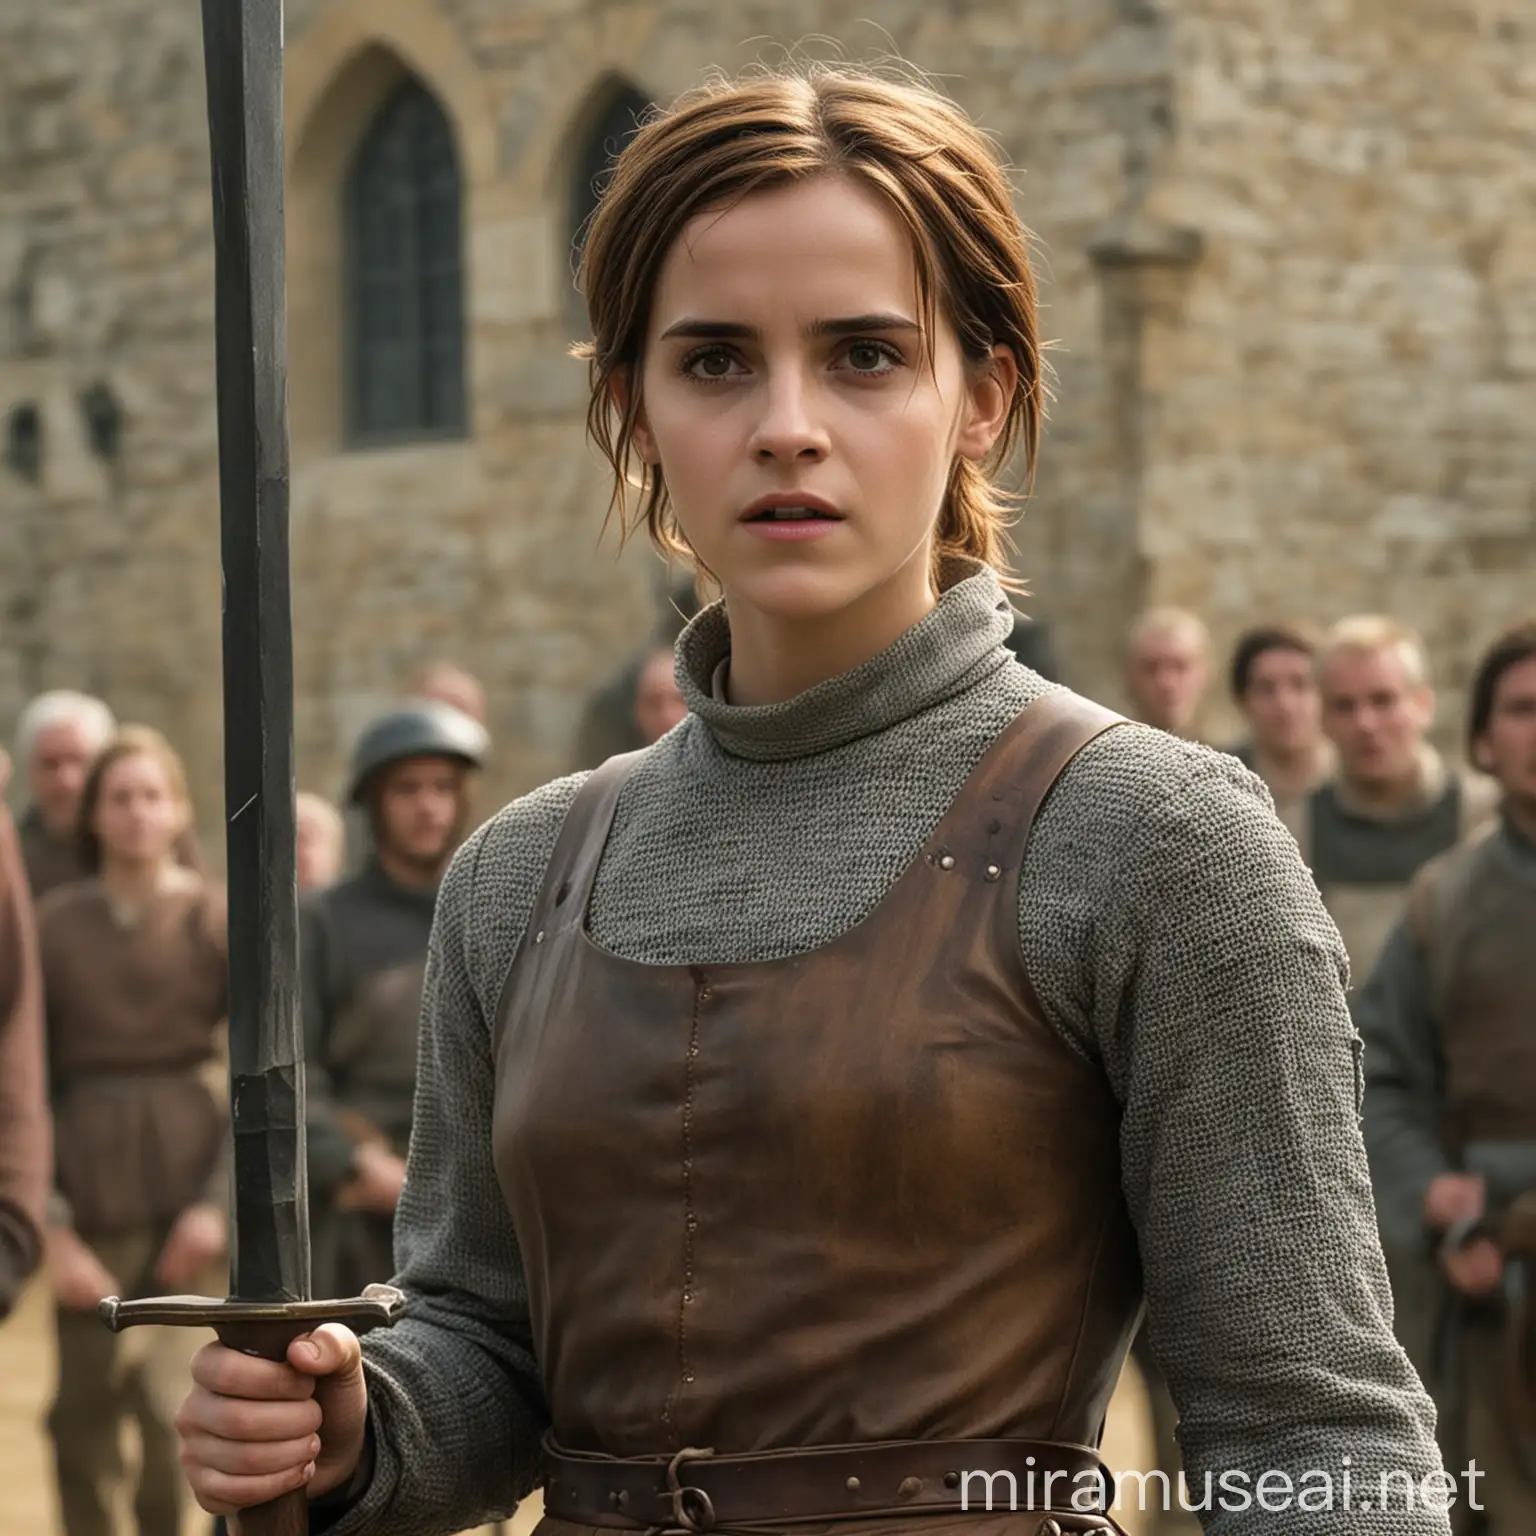 Emma Watson Portraying Joan of Arc at the Stake in Dramatic Scene